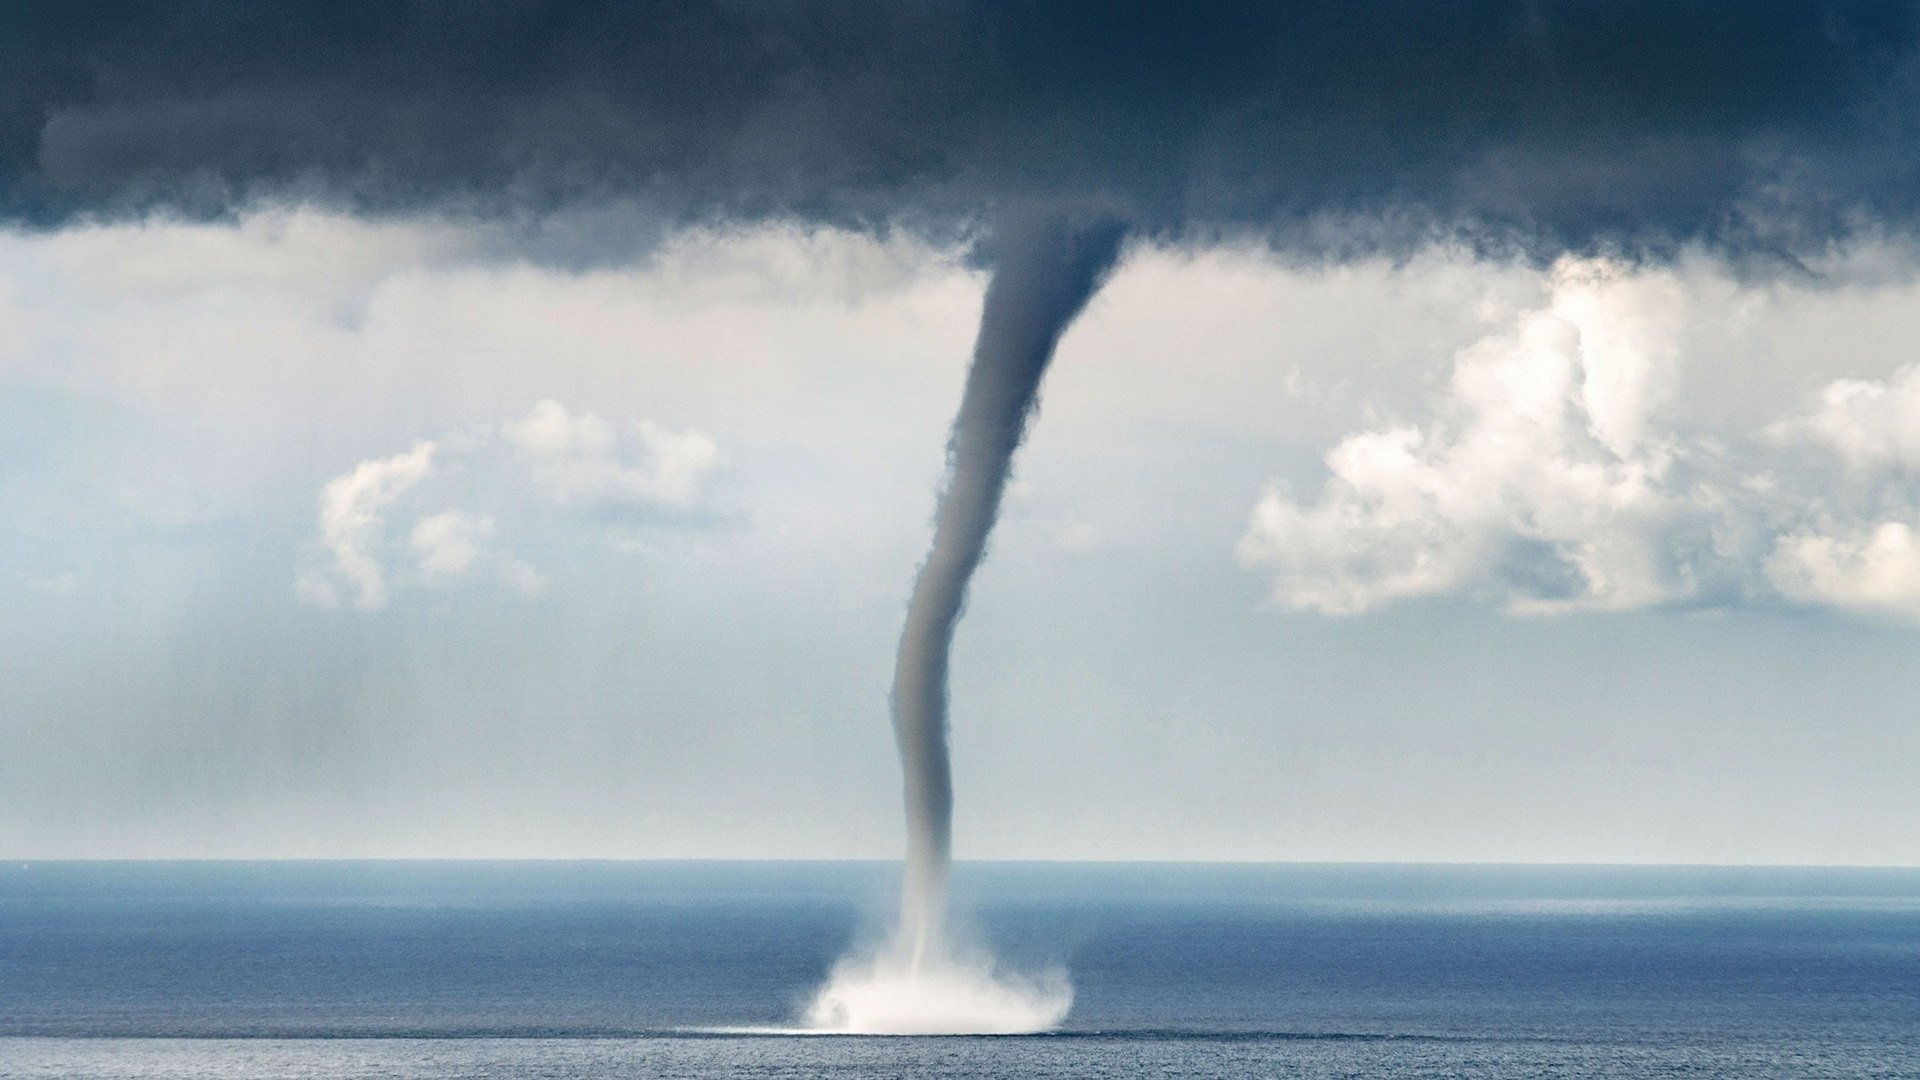 Waterspout HD Wallpaper Background Image